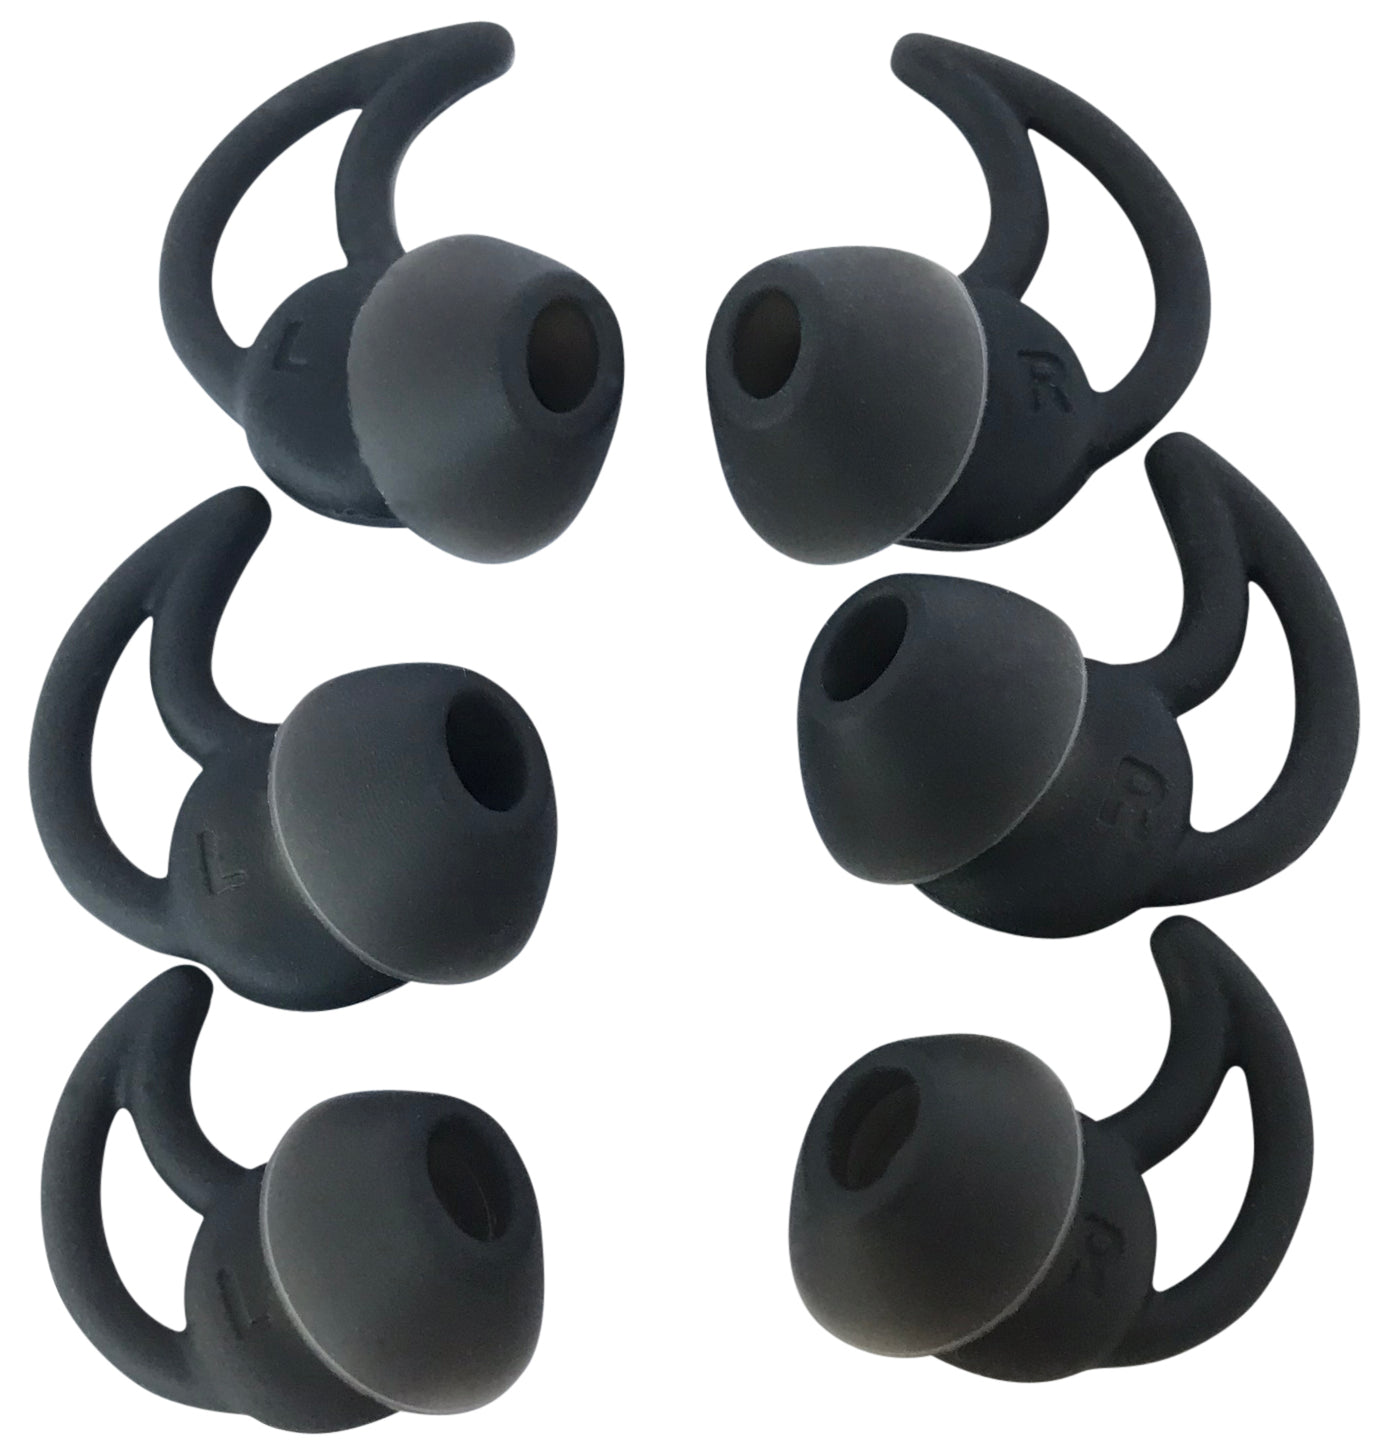 Replacement Ear Bud Tips Set for Bose SoundSport Truly Wireless In-Ear Headphones - CentralSound